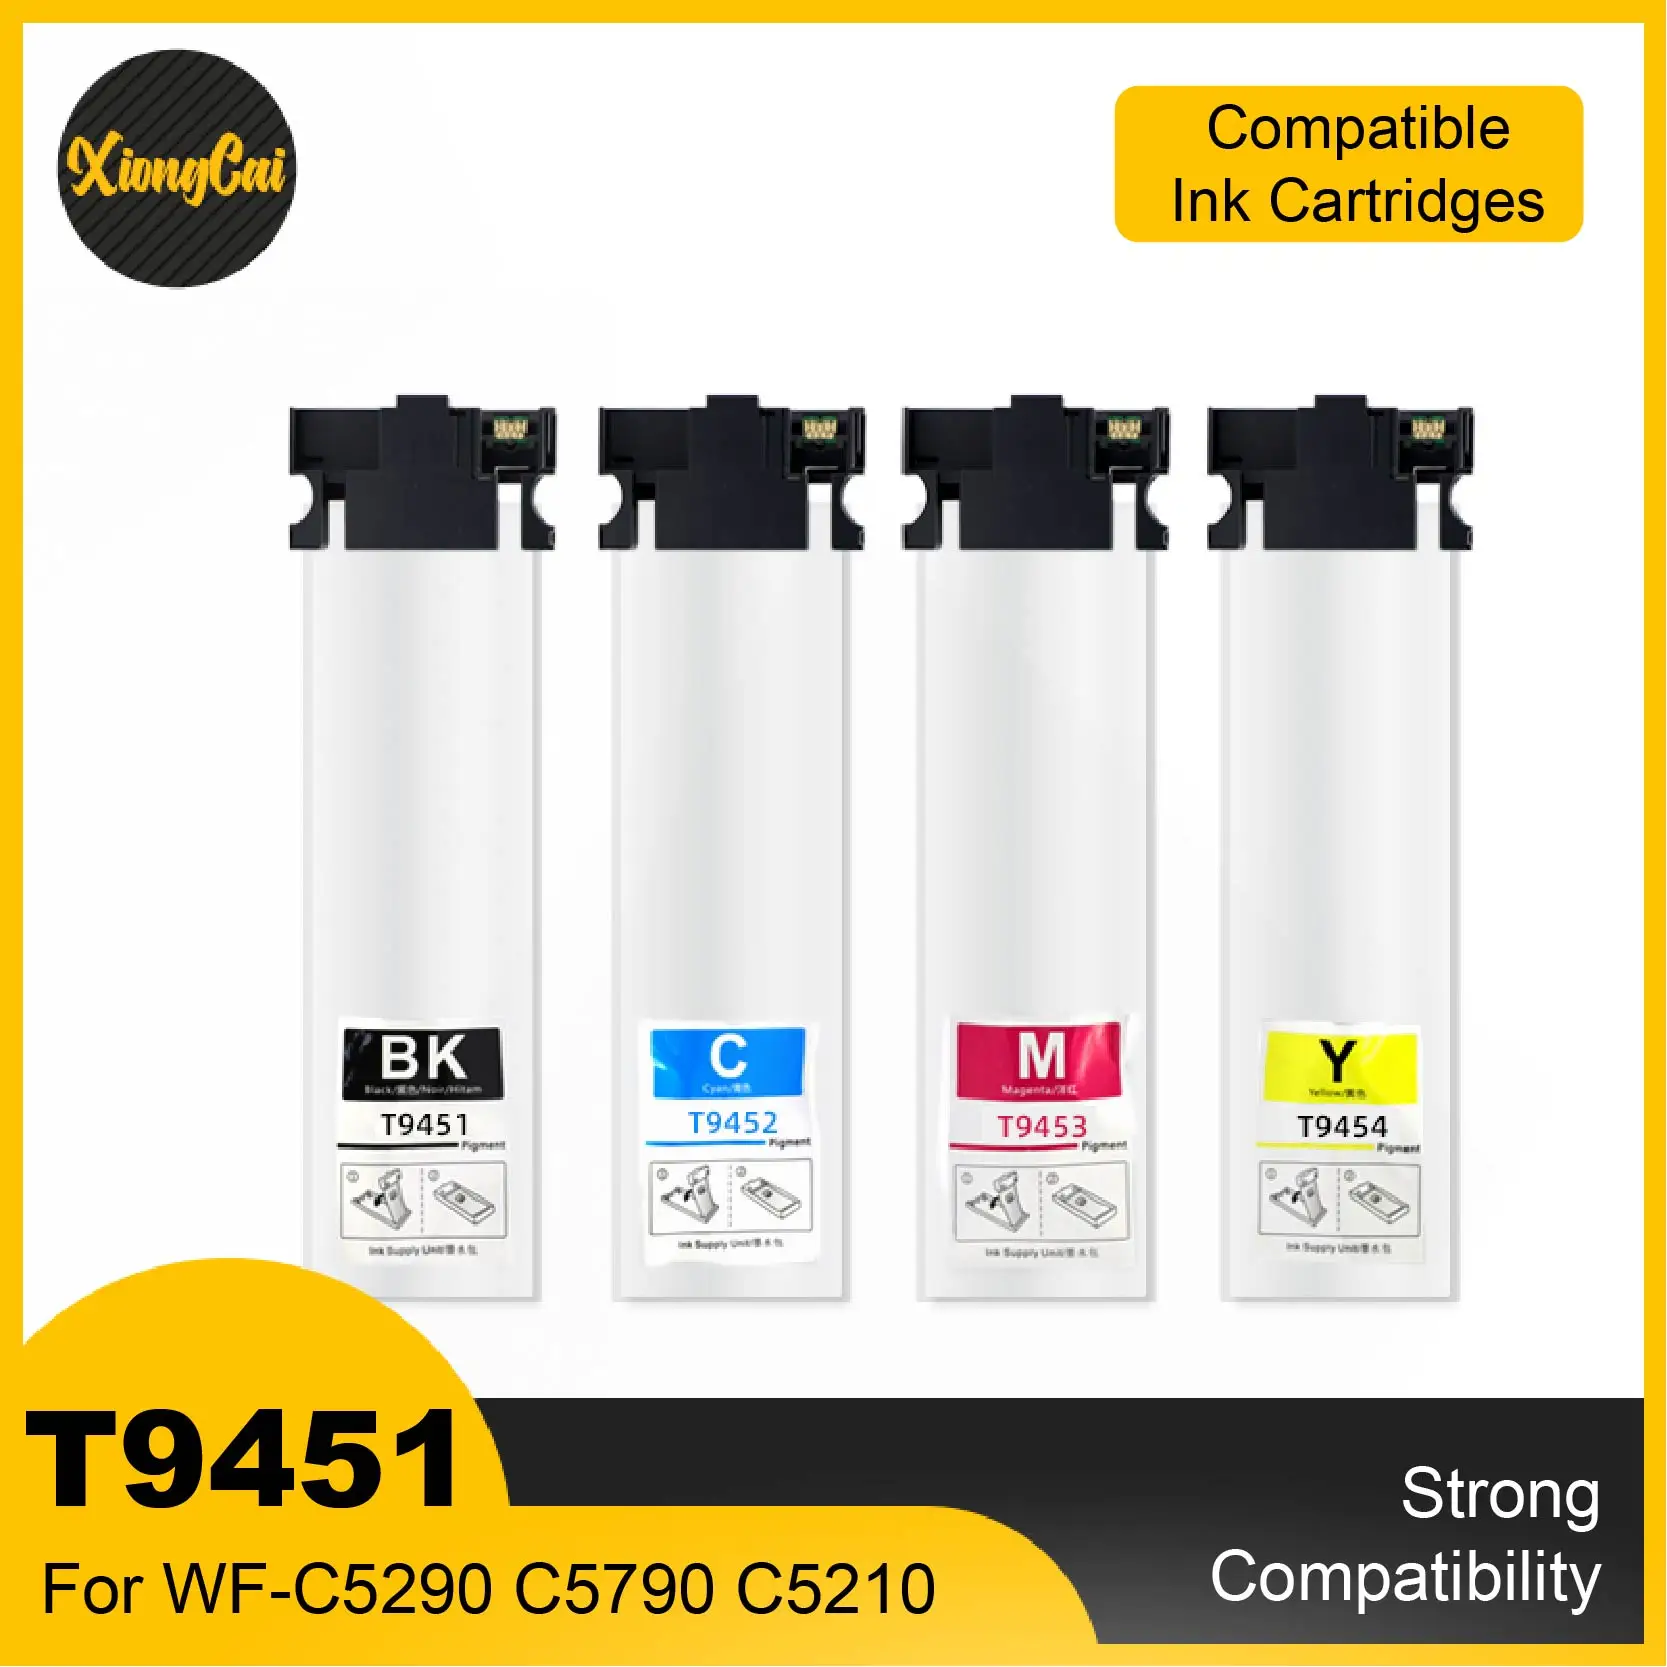 

New Compatible Ink Cartridges T9451 T9452 T9453 T9454 For Epson WorkForce Pro WF-C5210DW WF-C5290DW WF-C5710DWF WF-C5790DWF